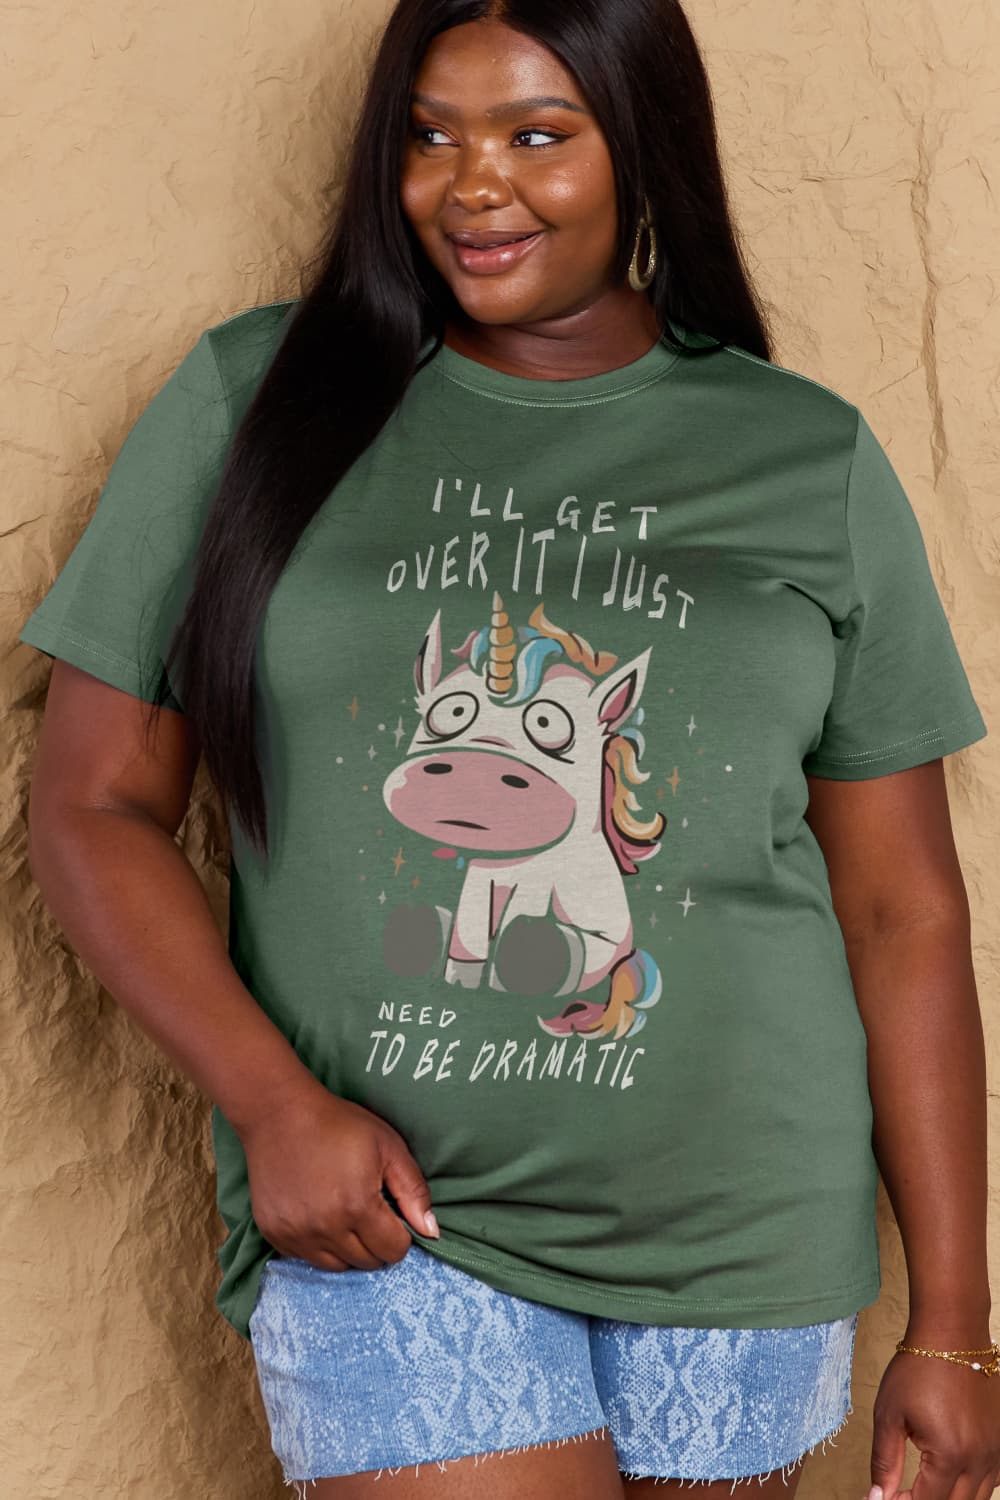 I'LL GET OVER IT I JUST NEED TO BE DRAMATIC Graphic Cotton Tee